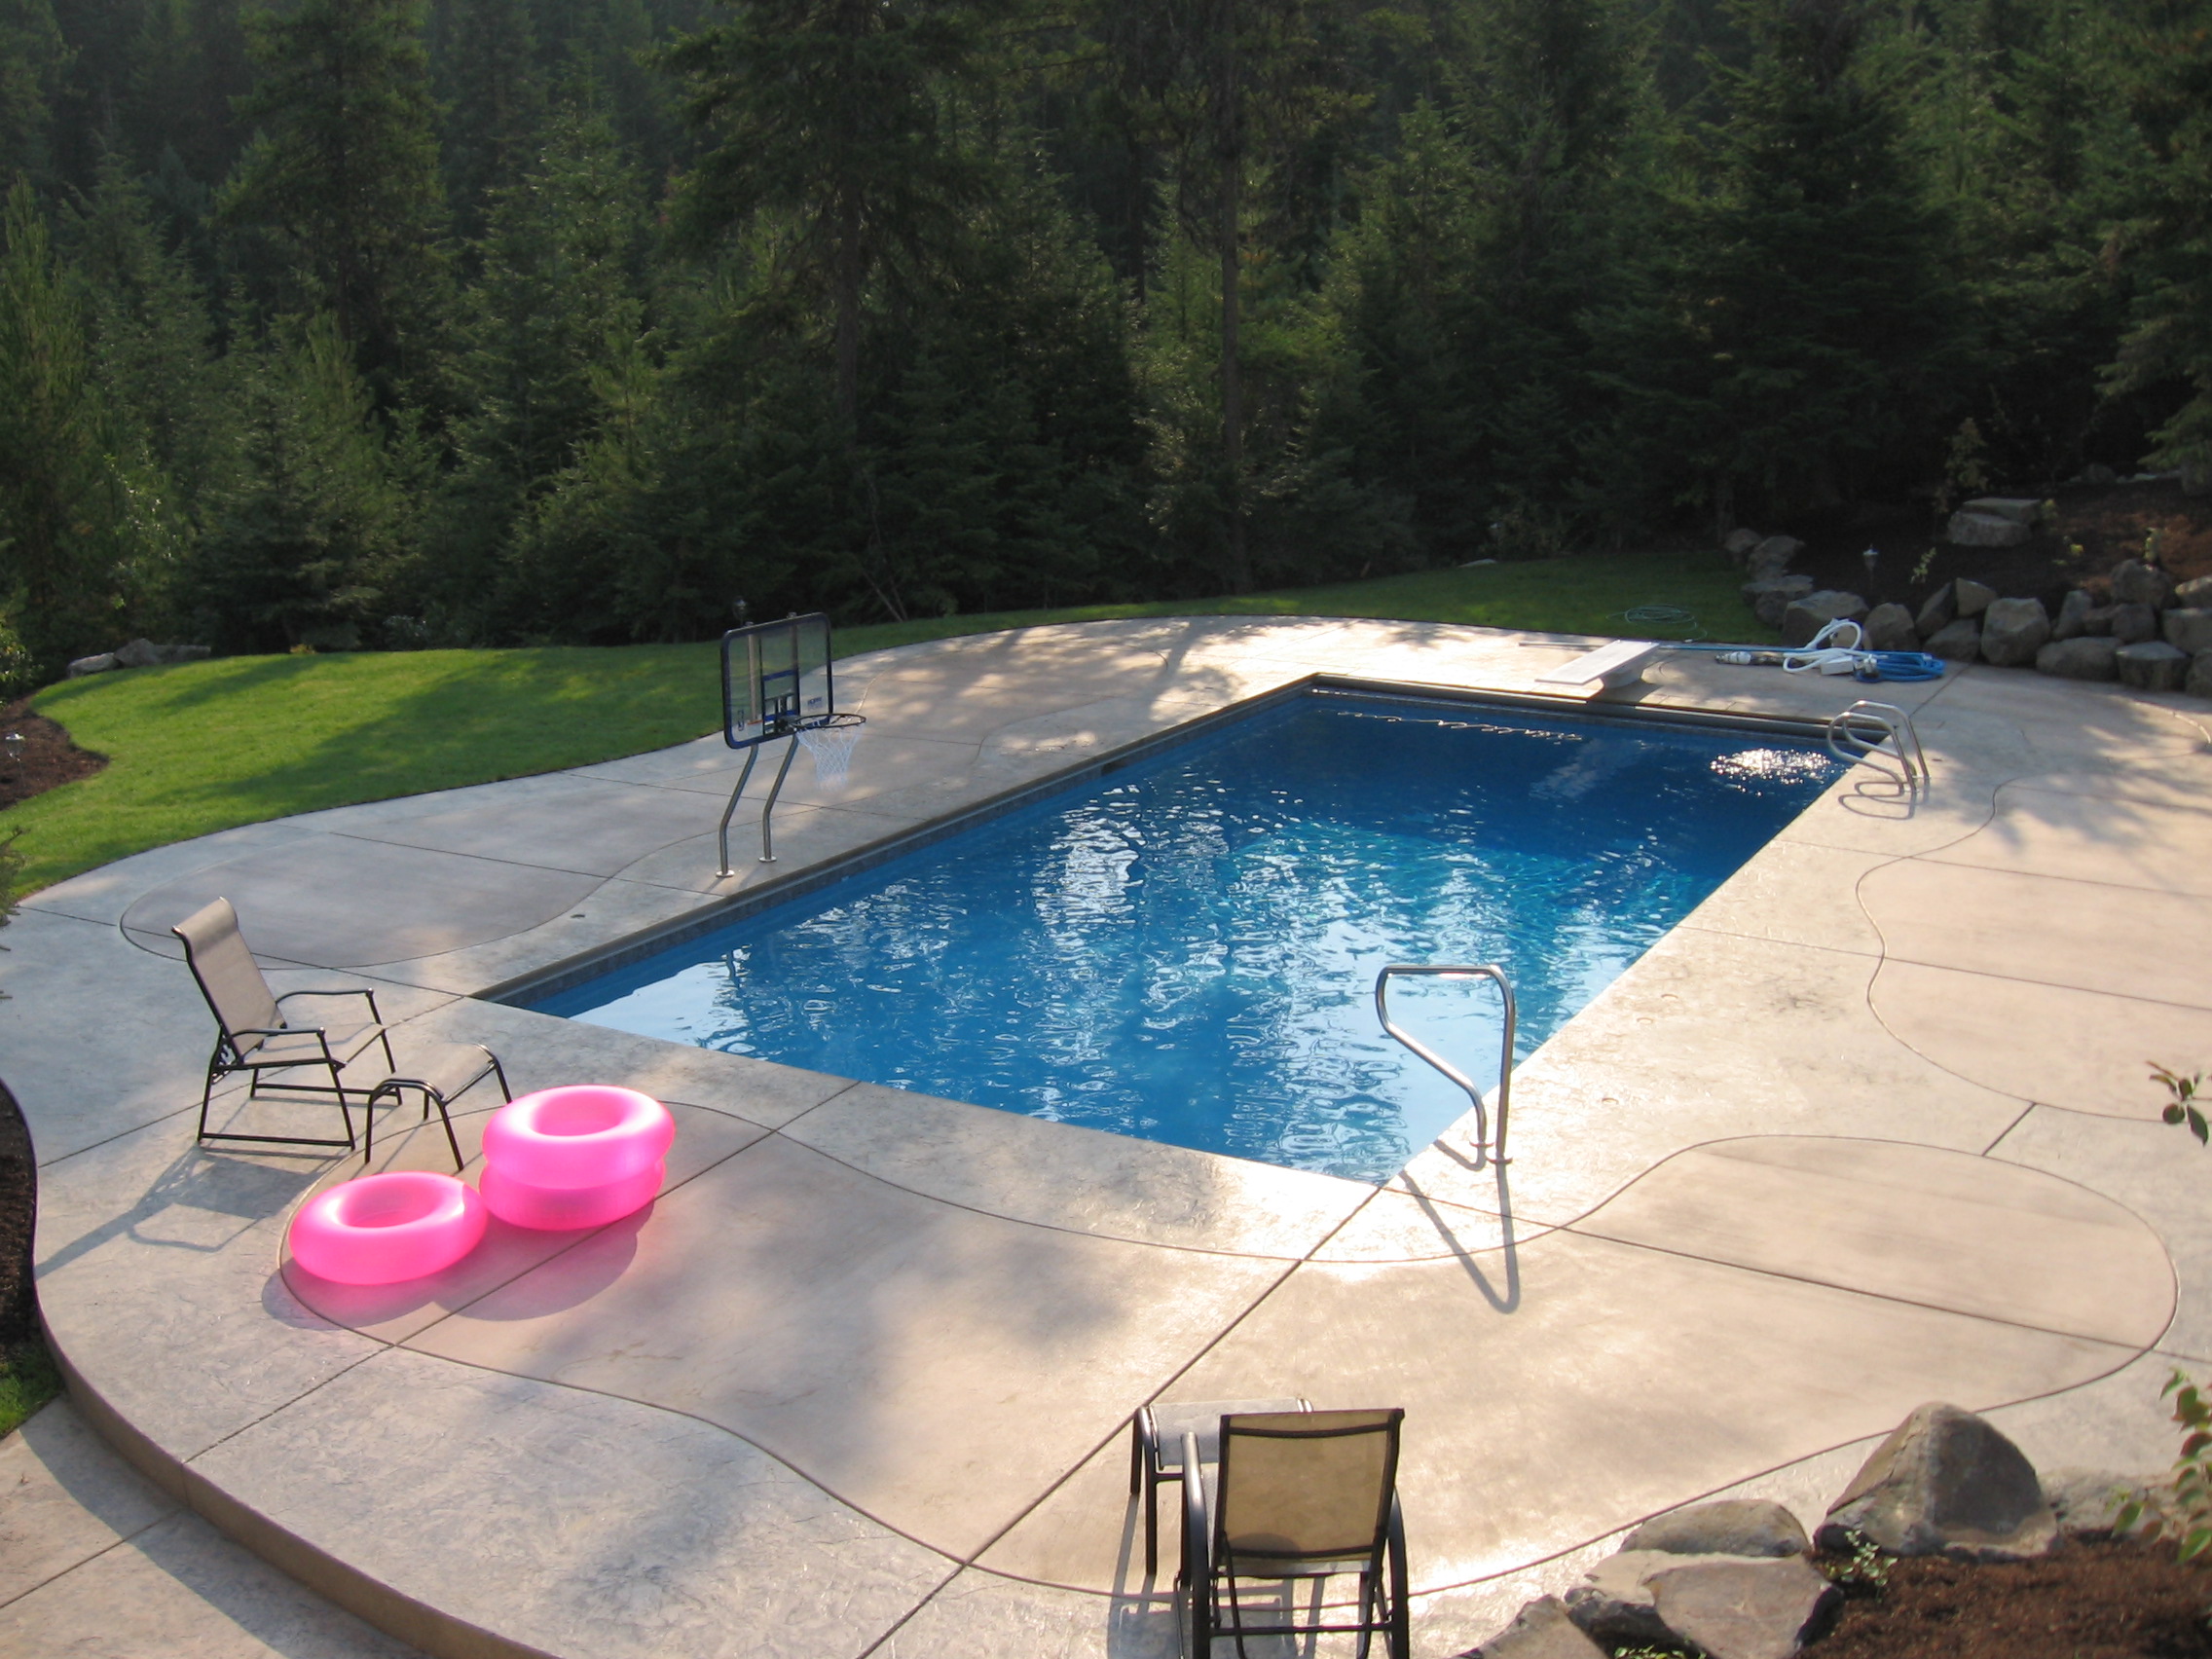 Spring Splashdown: Transform Your Backyard with Pool World’s Premier Pool Building and Installation Services!